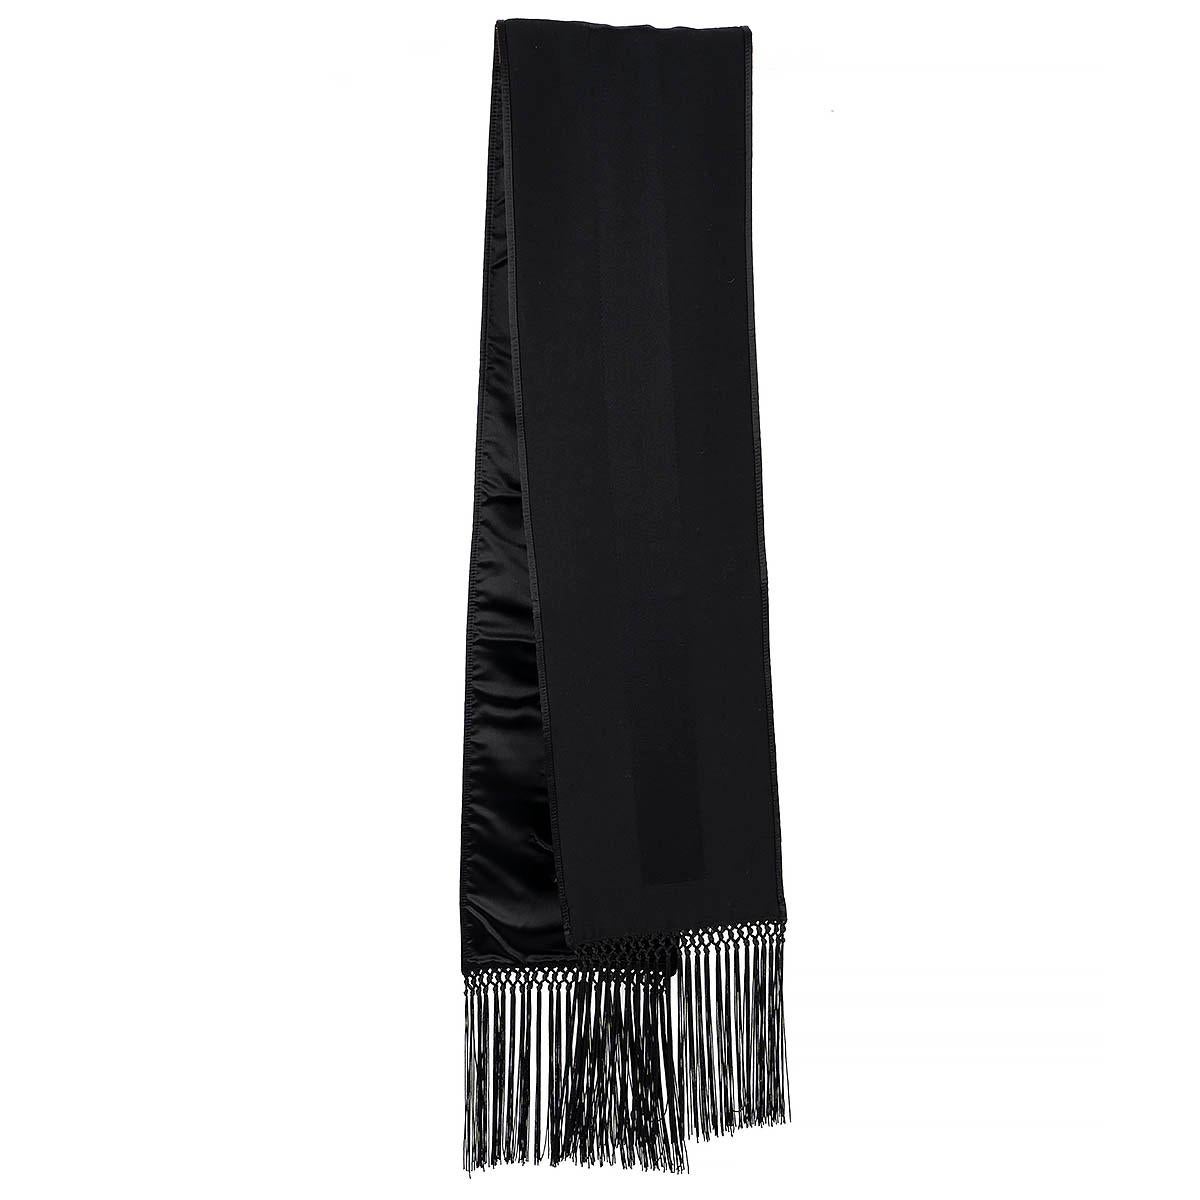 100% authentic Saint Laurent fringed doubleface scarf in black silk satin and wool (missing tag) embroidered with the YSL logo.  Has been worn and is in excellent condition. 

Measurements
Width	19.5cm (7.6in)
Length	160cm (62.4in)

All our listings